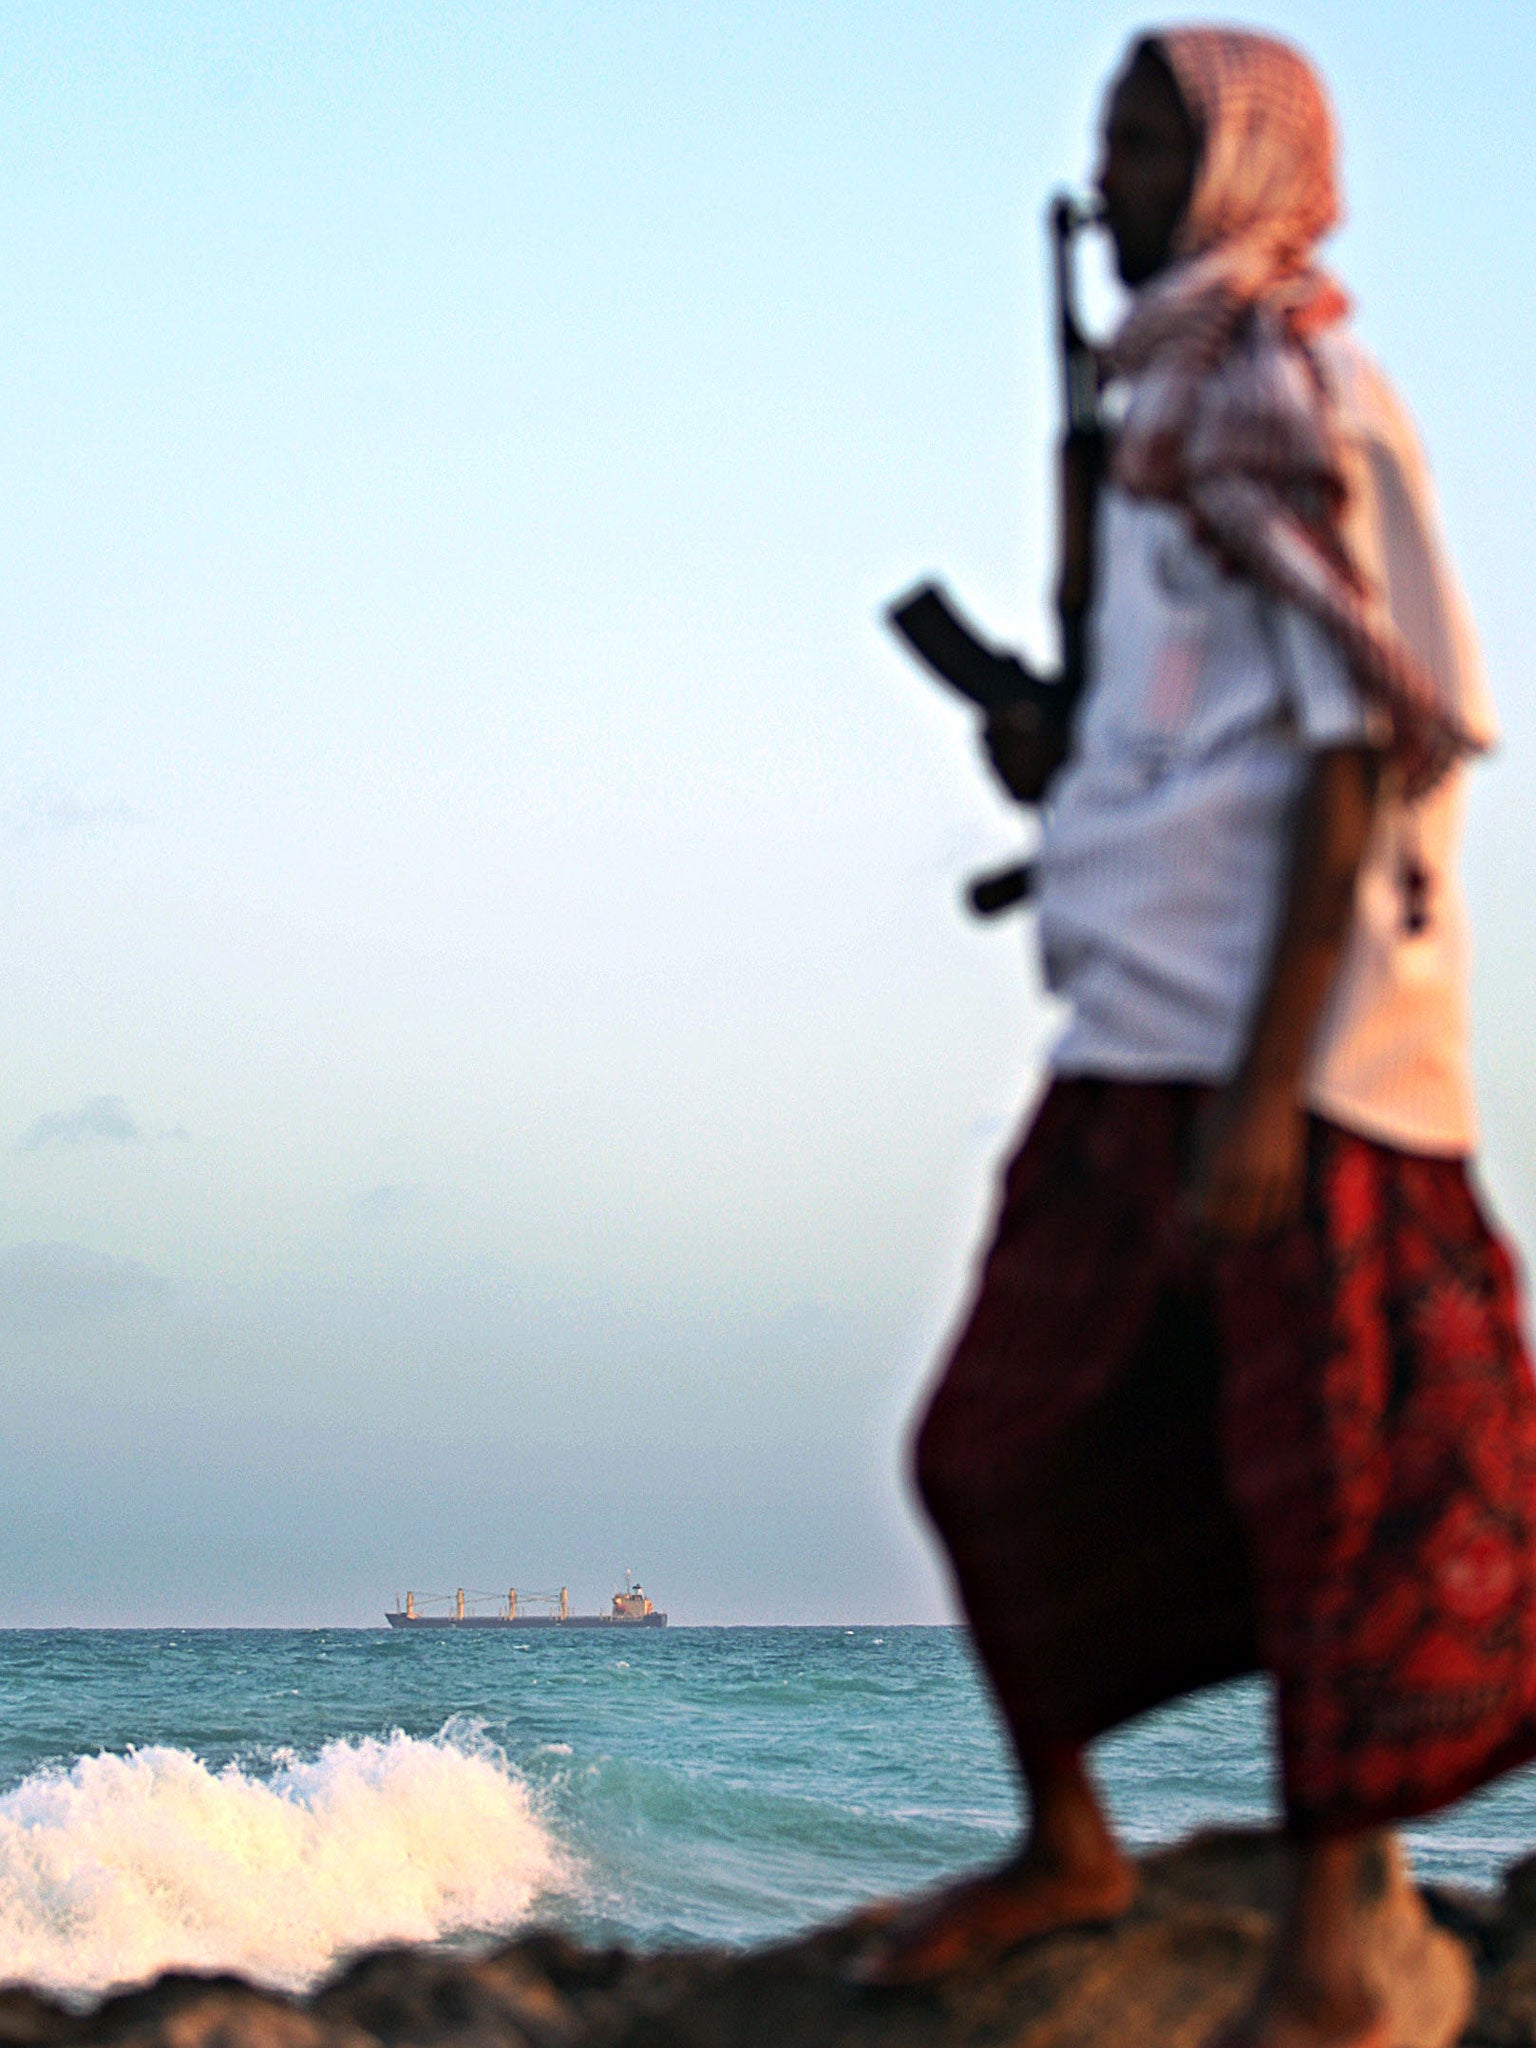 Pirates can operate with relative impunity in war-torn Somalia